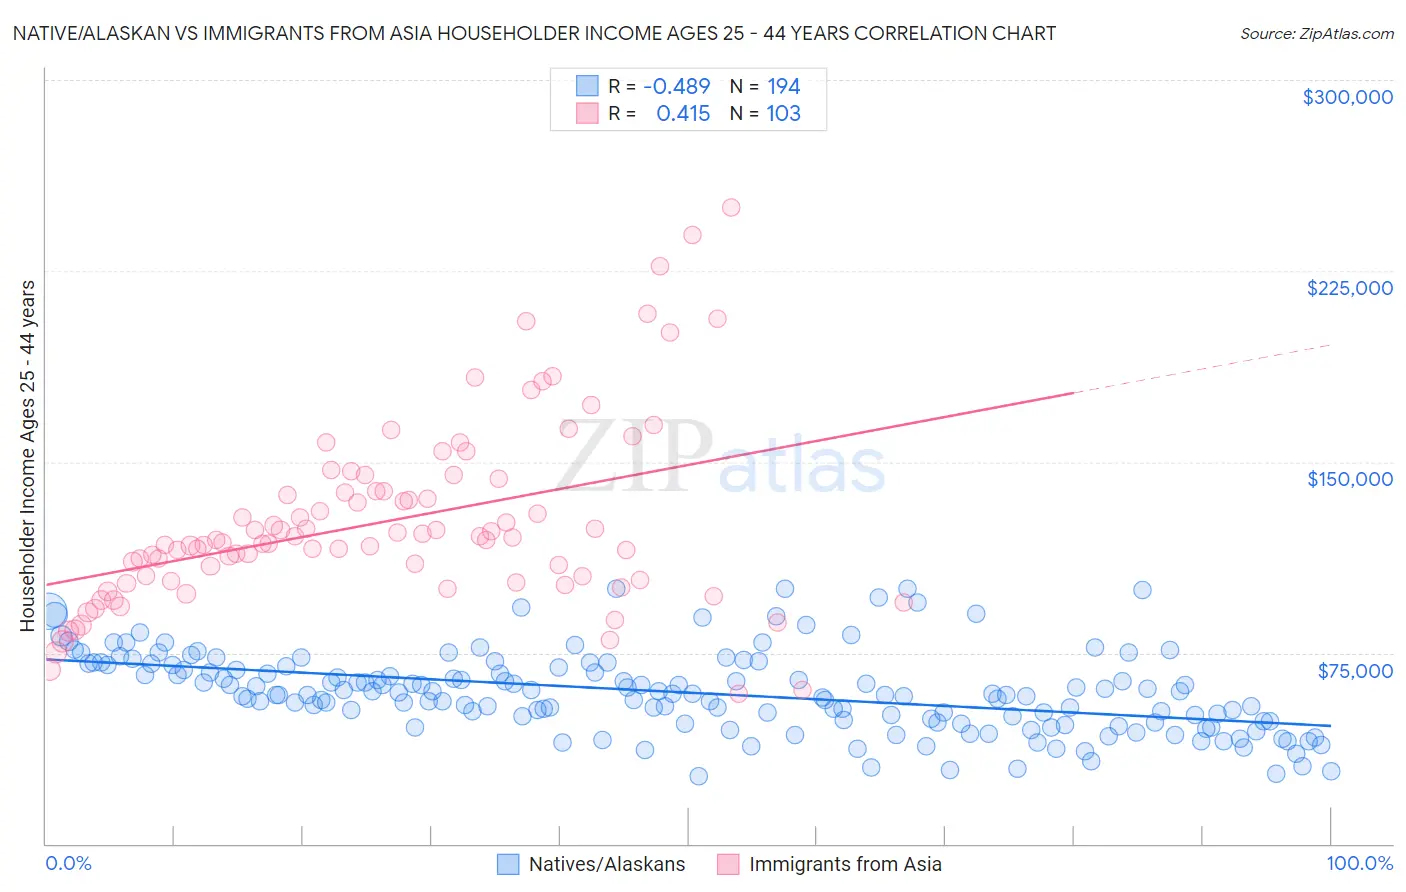 Native/Alaskan vs Immigrants from Asia Householder Income Ages 25 - 44 years